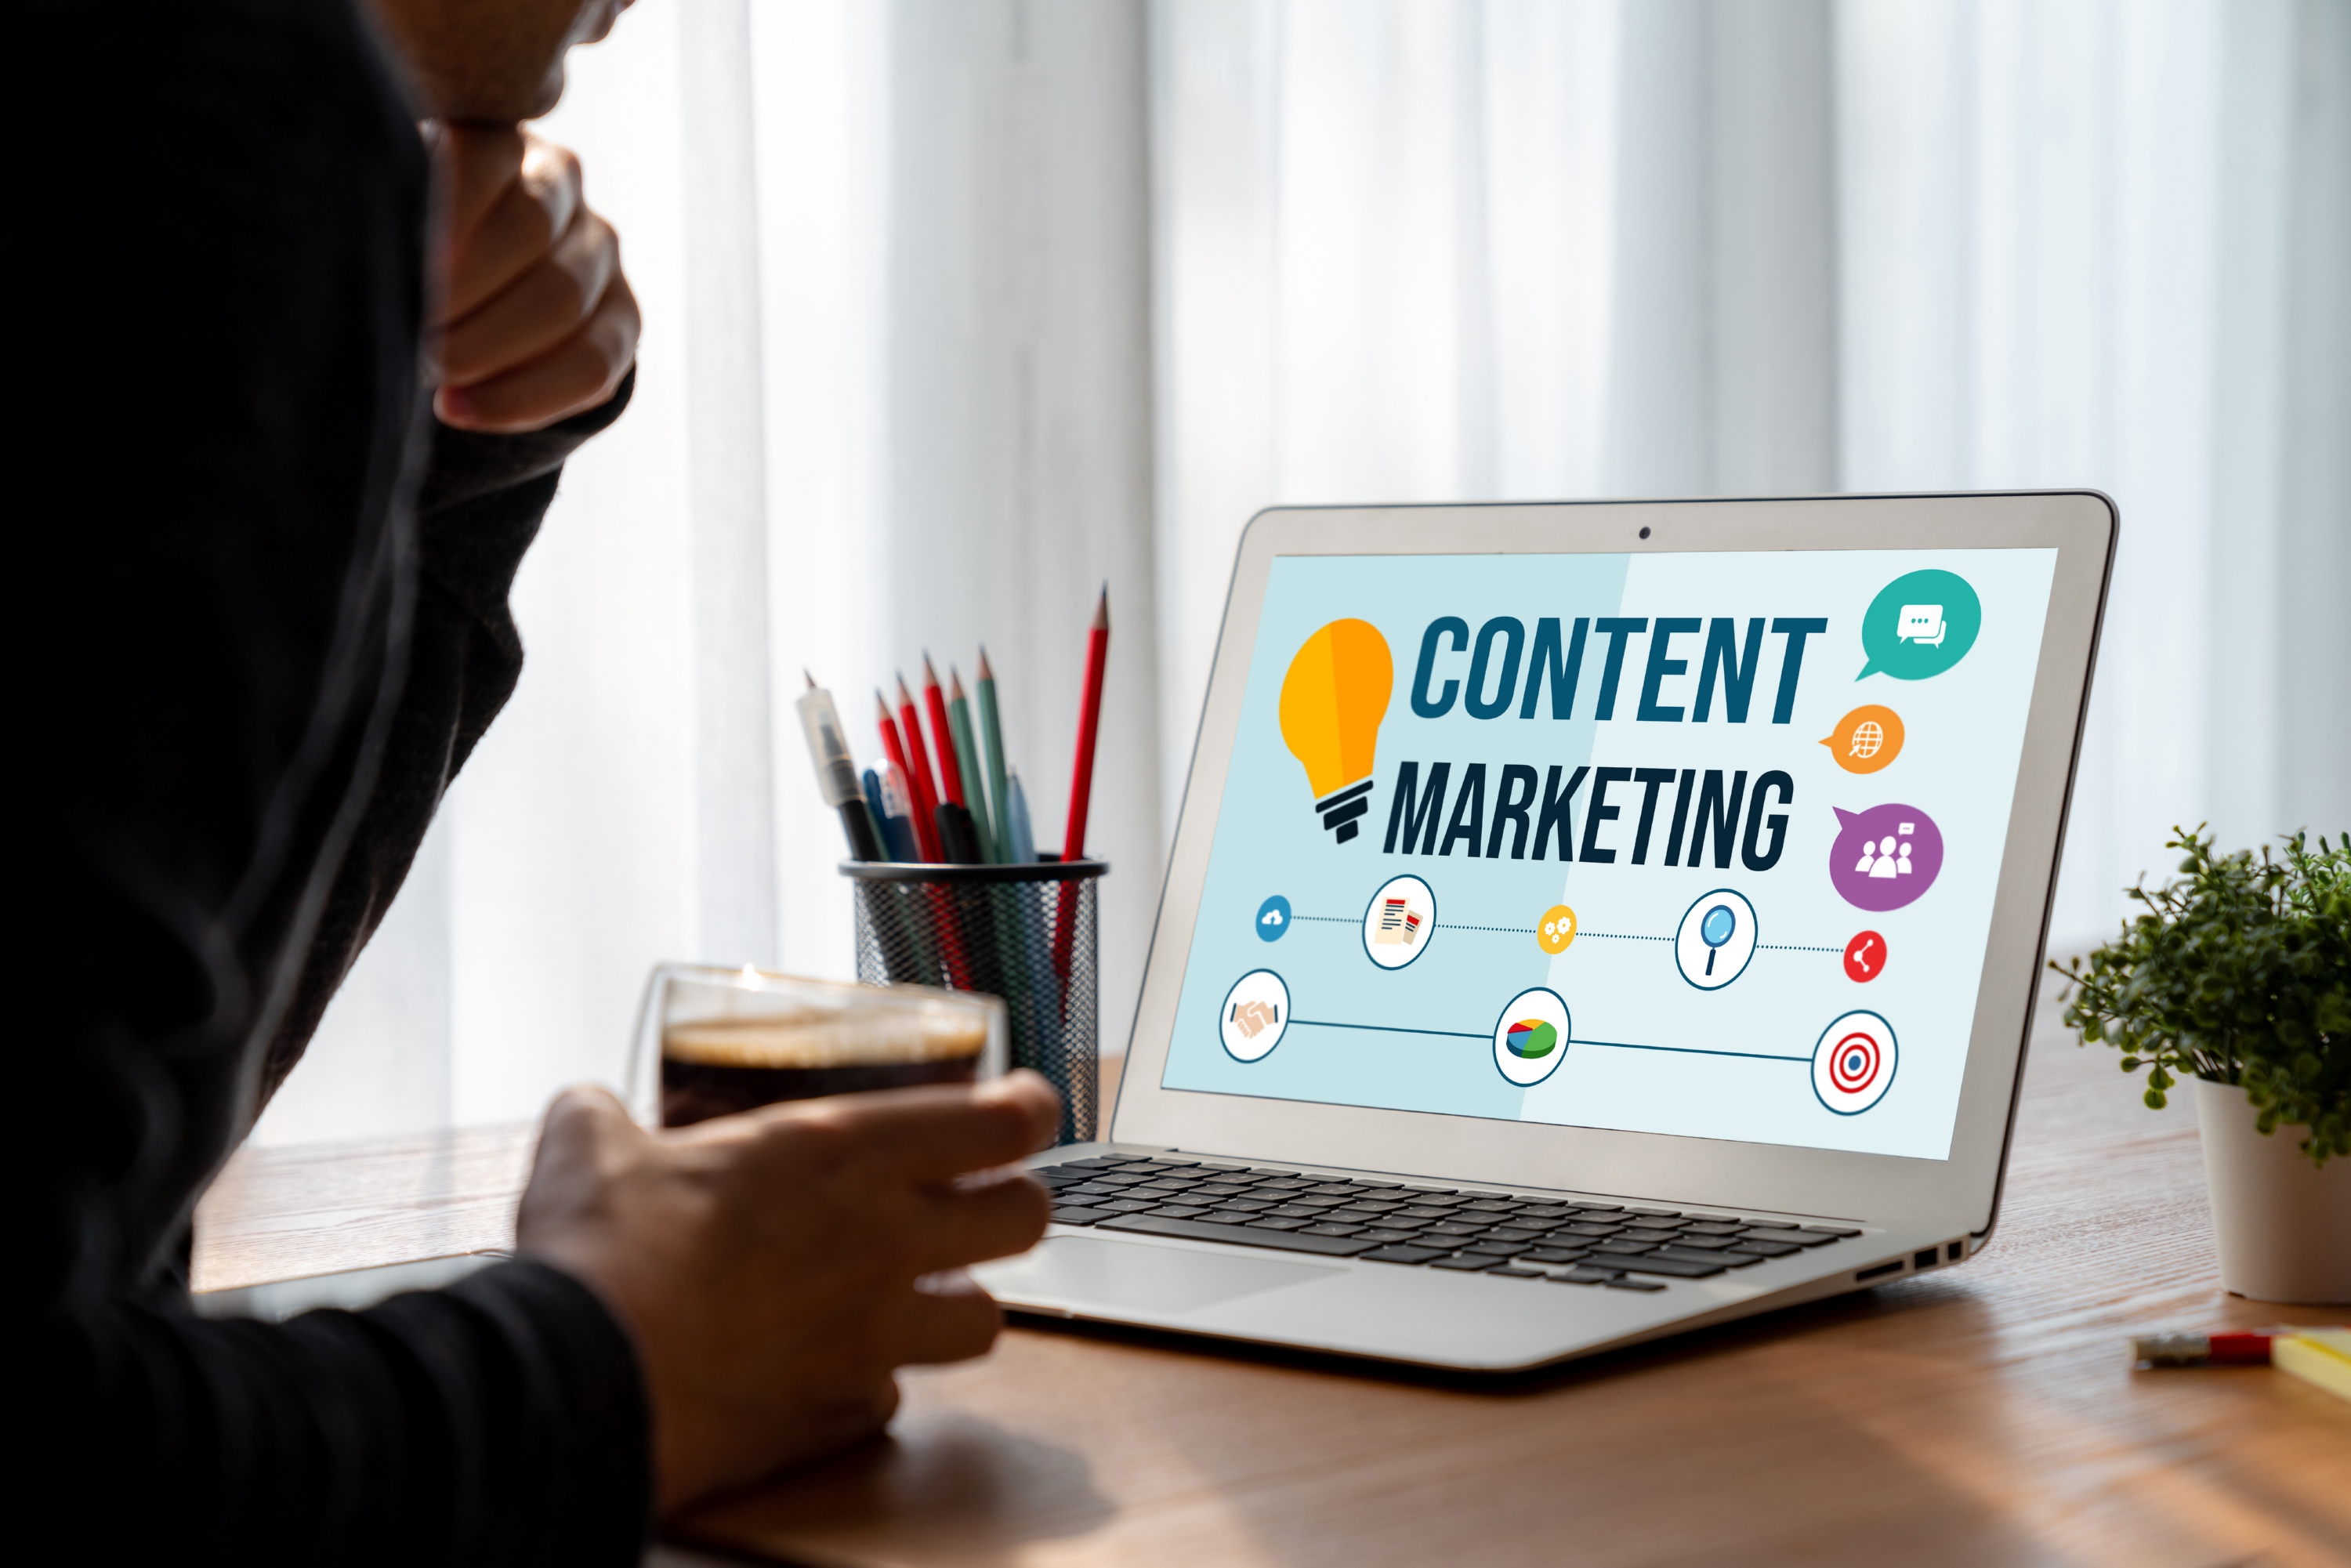 The Power of Content Marketing: How to create compelling content that converts | nasscom | The Official Community of Indian IT Industry